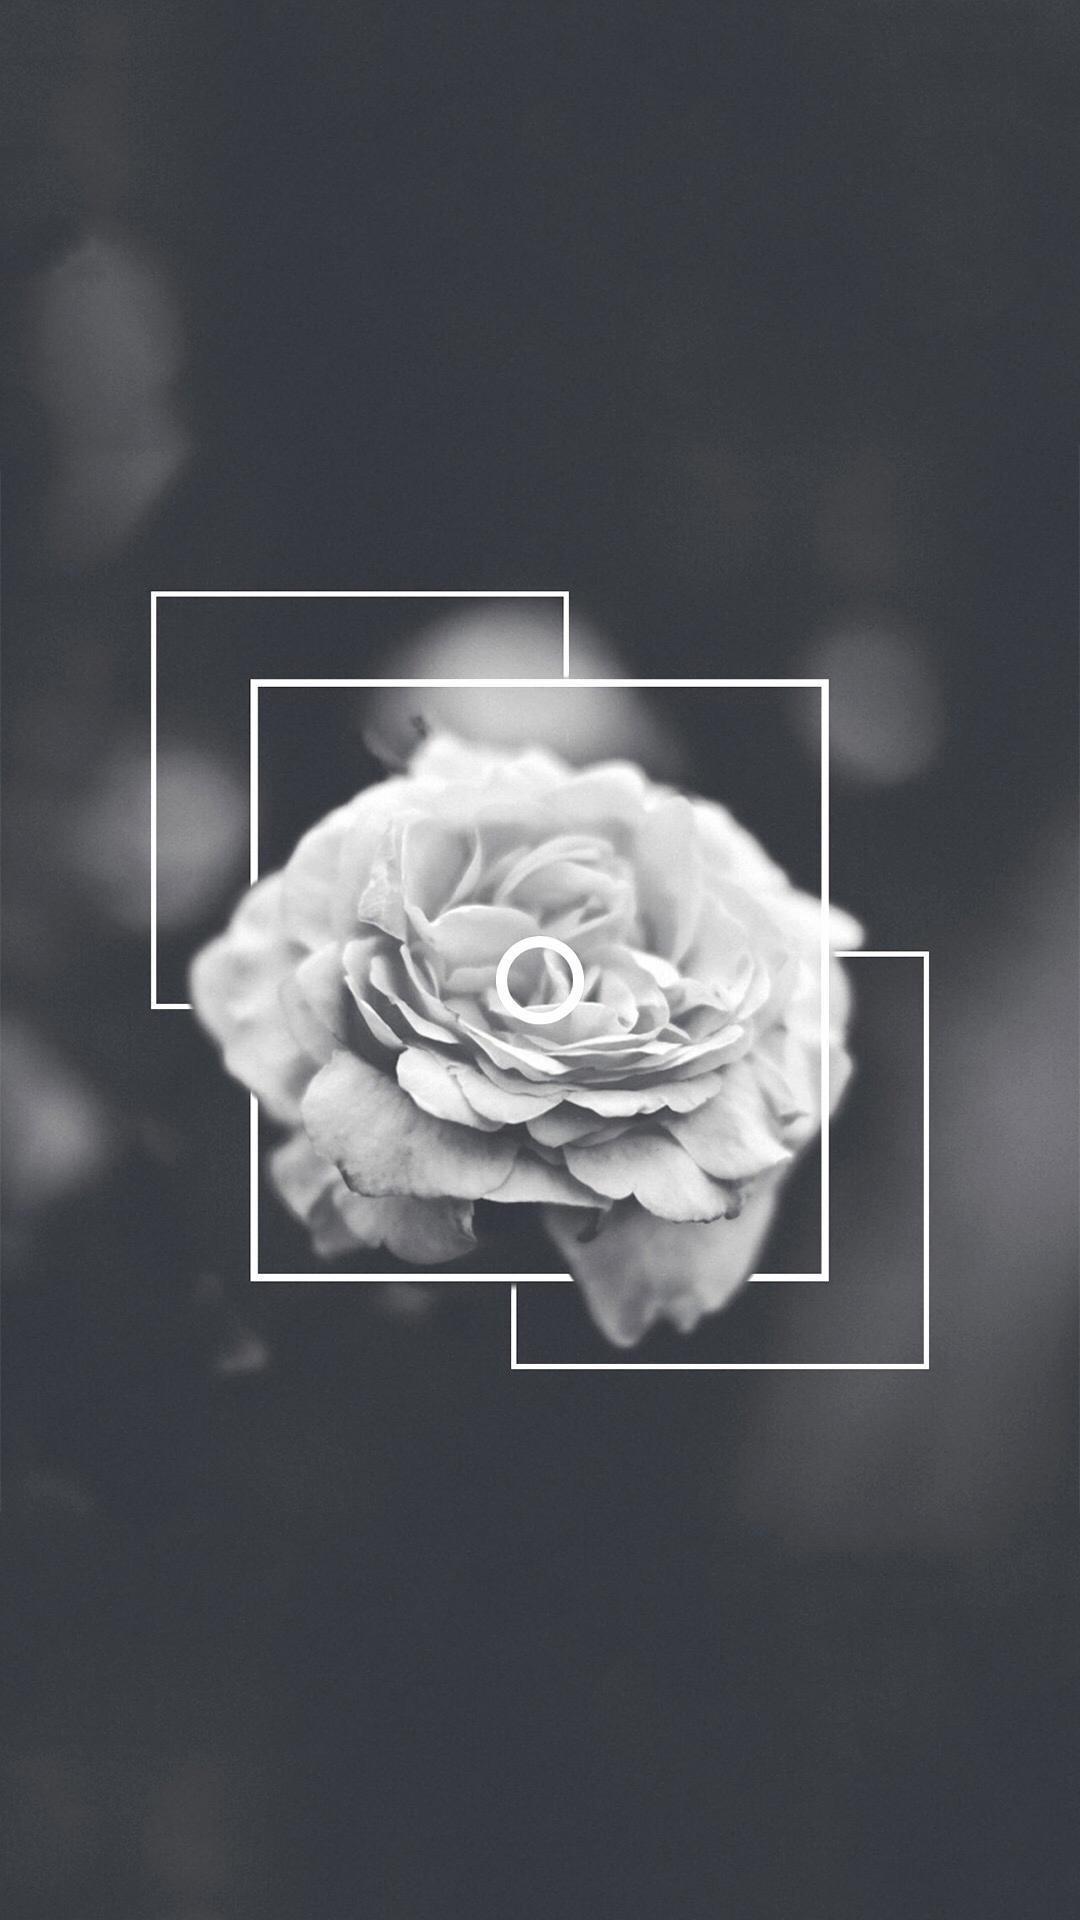 Wallpaper Tumblr iPhone Black And White Roses